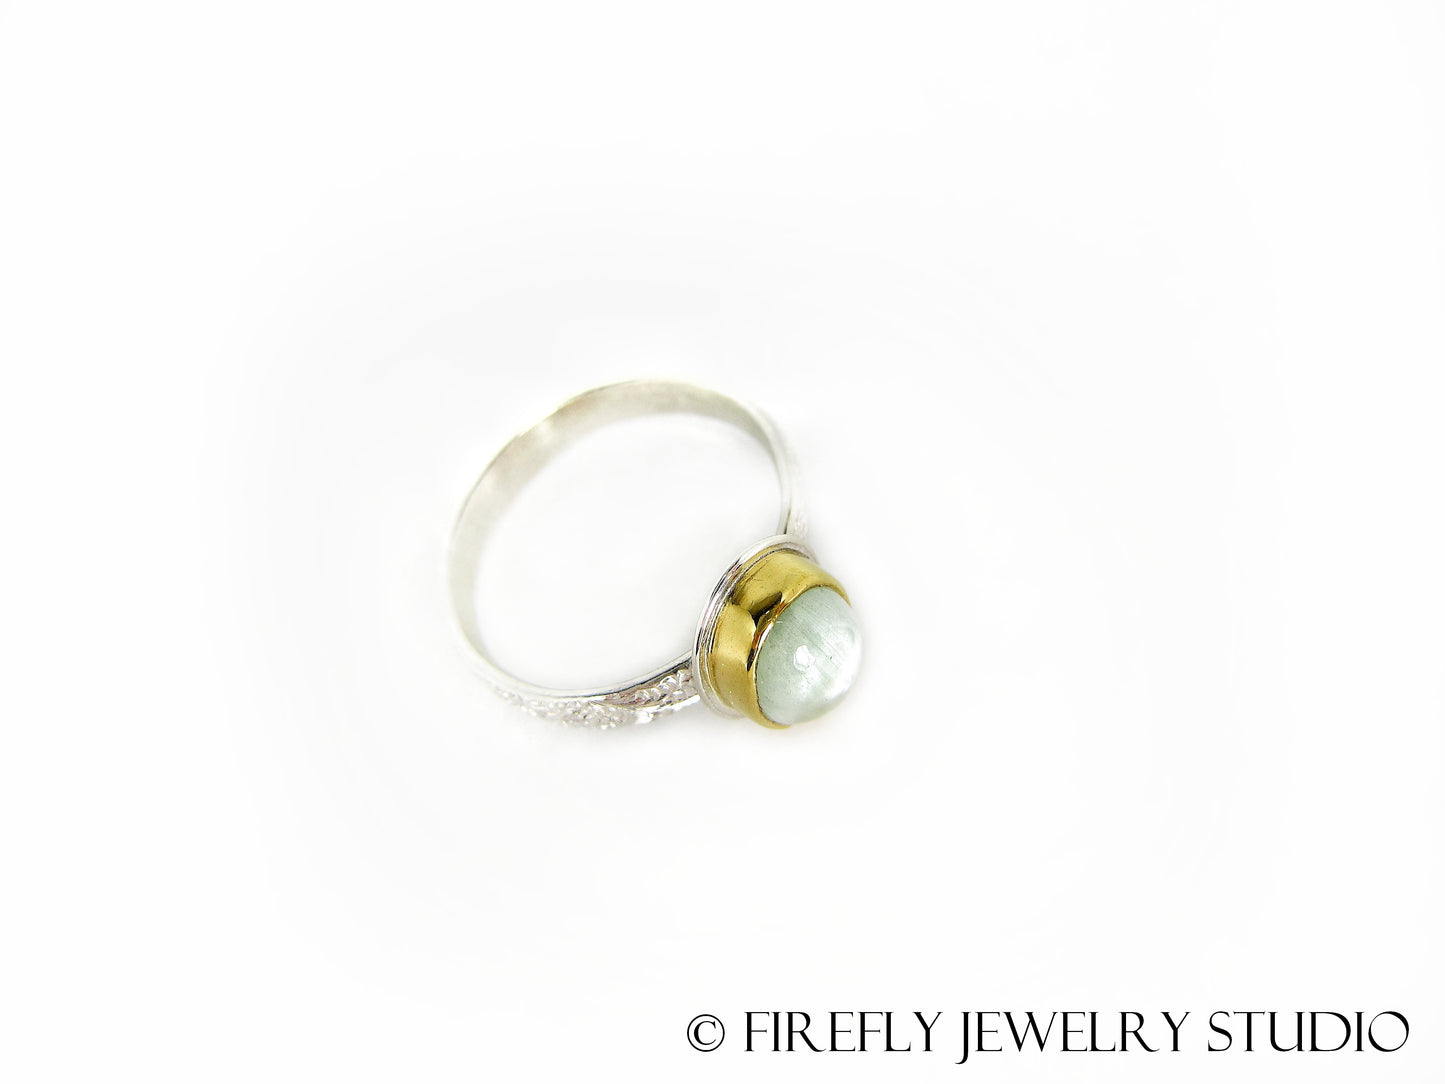 Aquamarine Oval Ring in 24k Gold and Sterling. Size 7.5 - Firefly Jewelry Studio